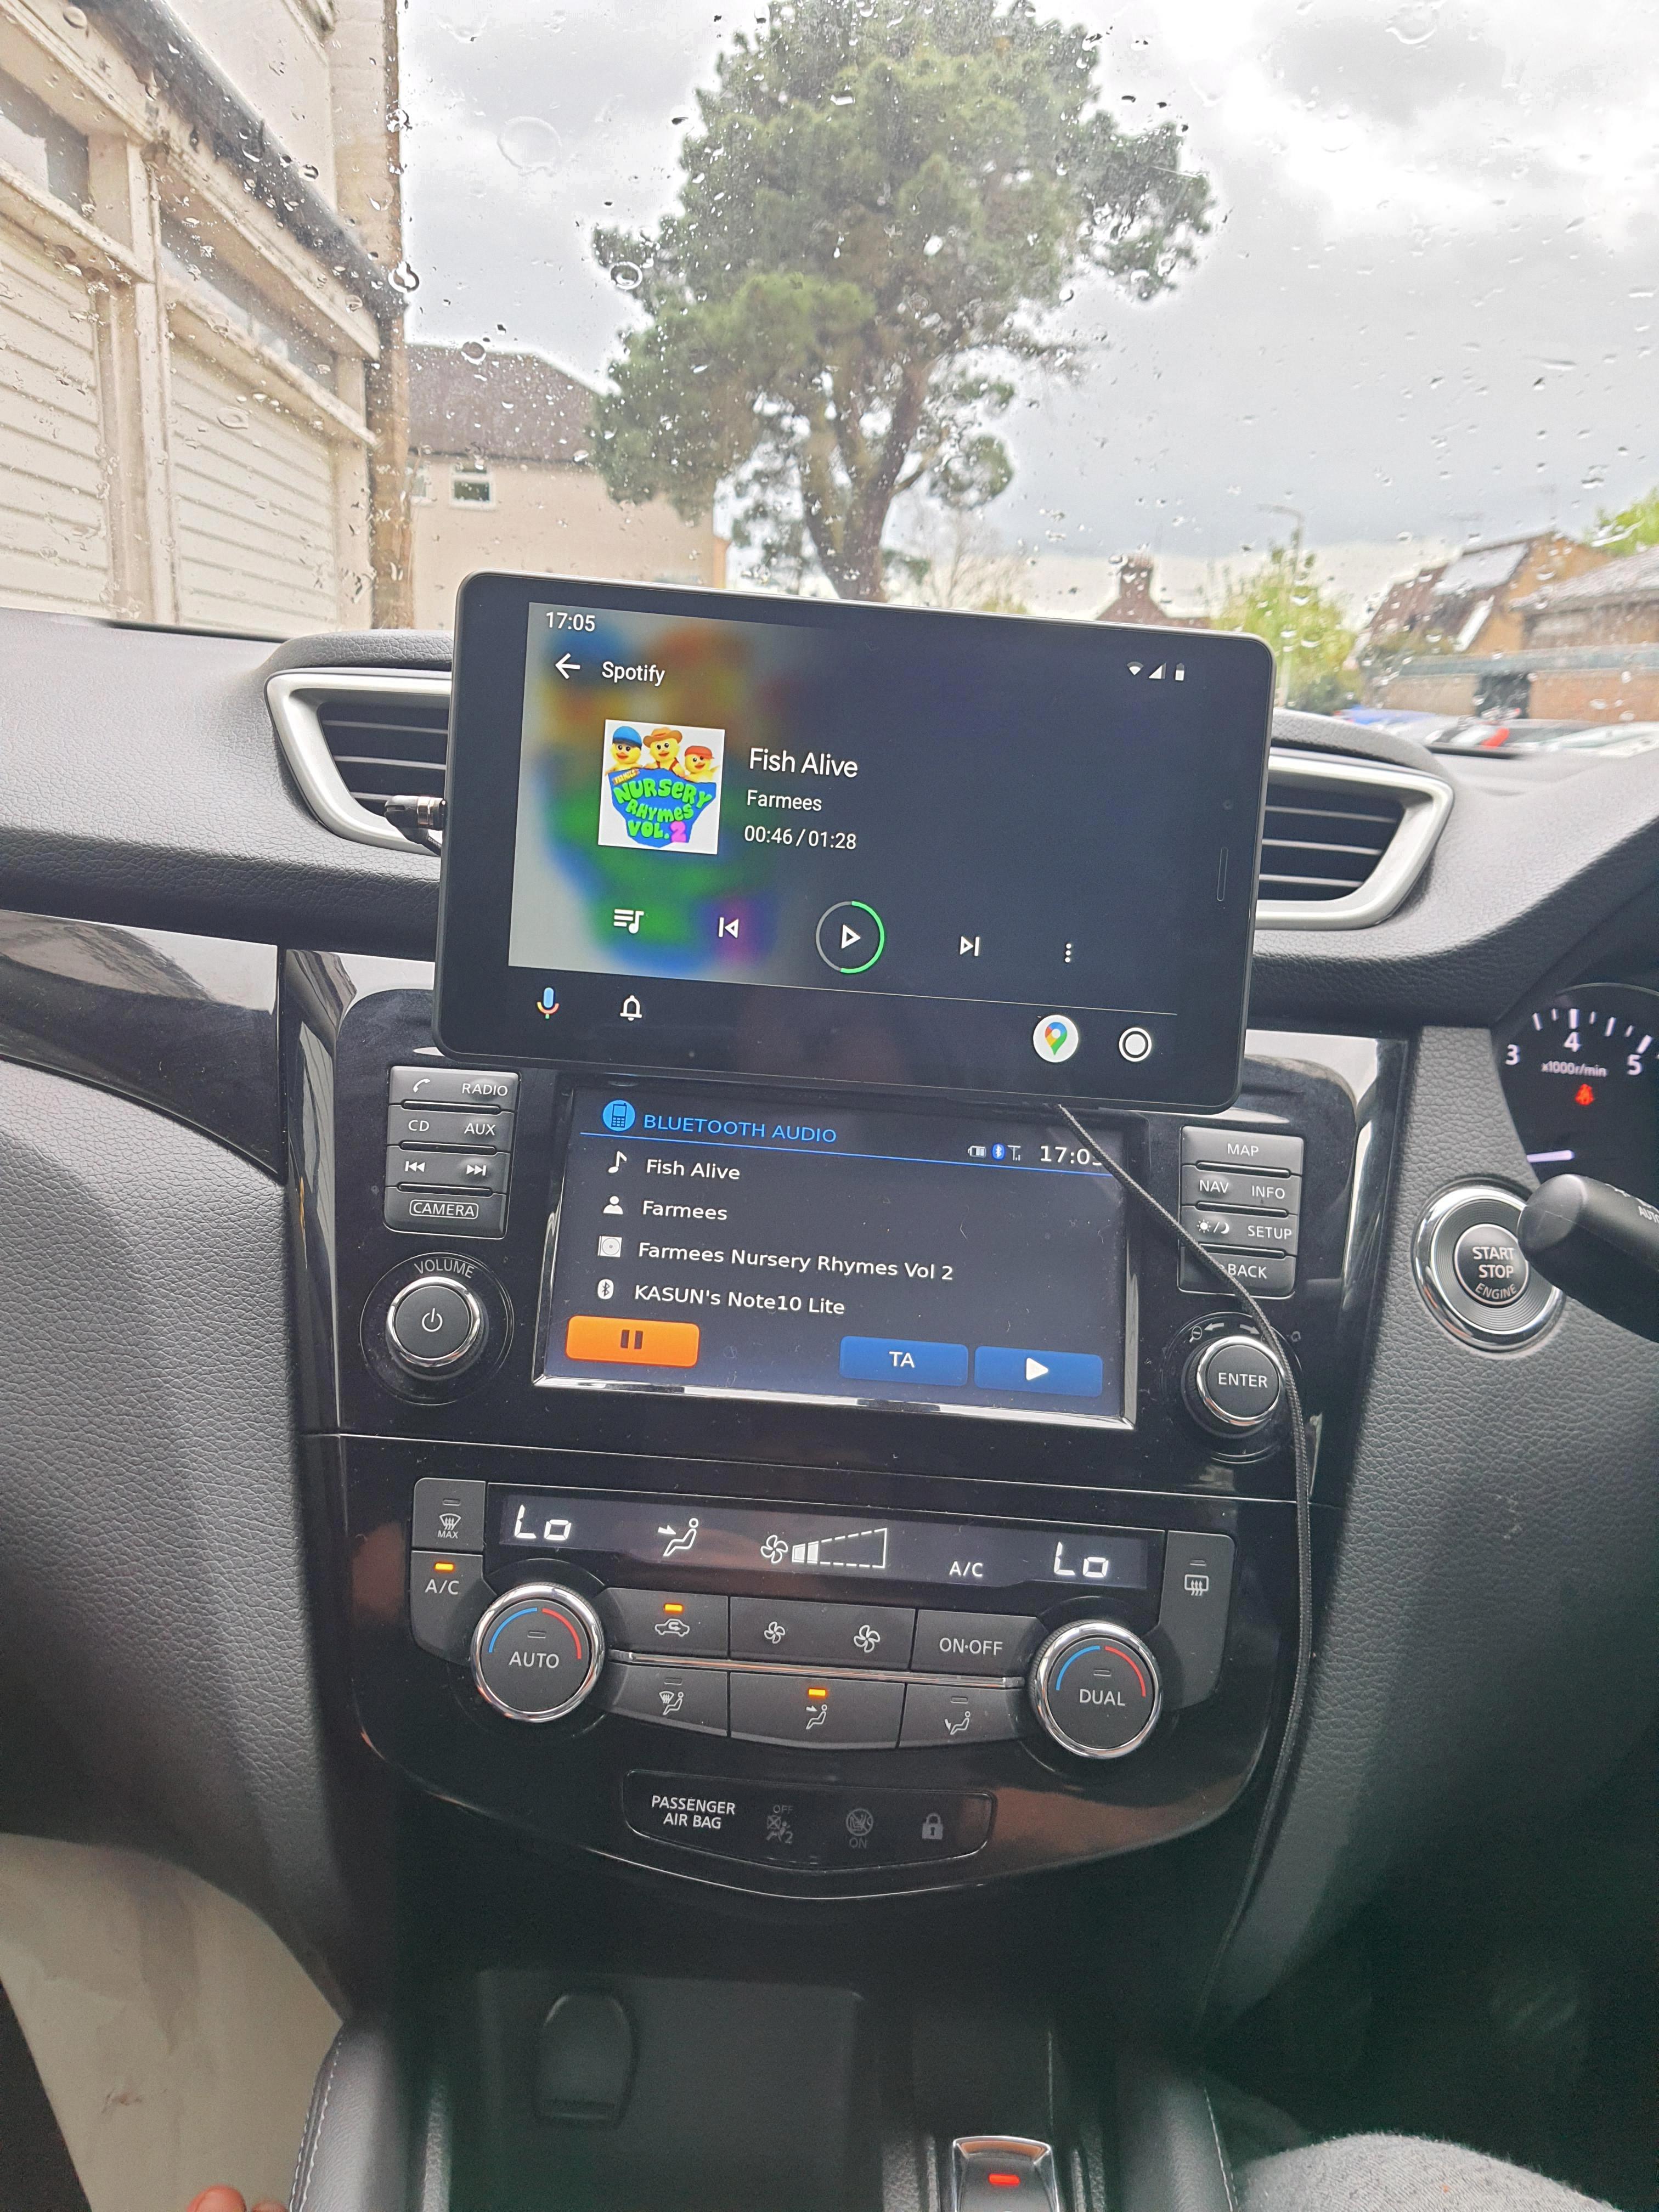 How to Transform Your Tablet into an Android Auto Device? 1